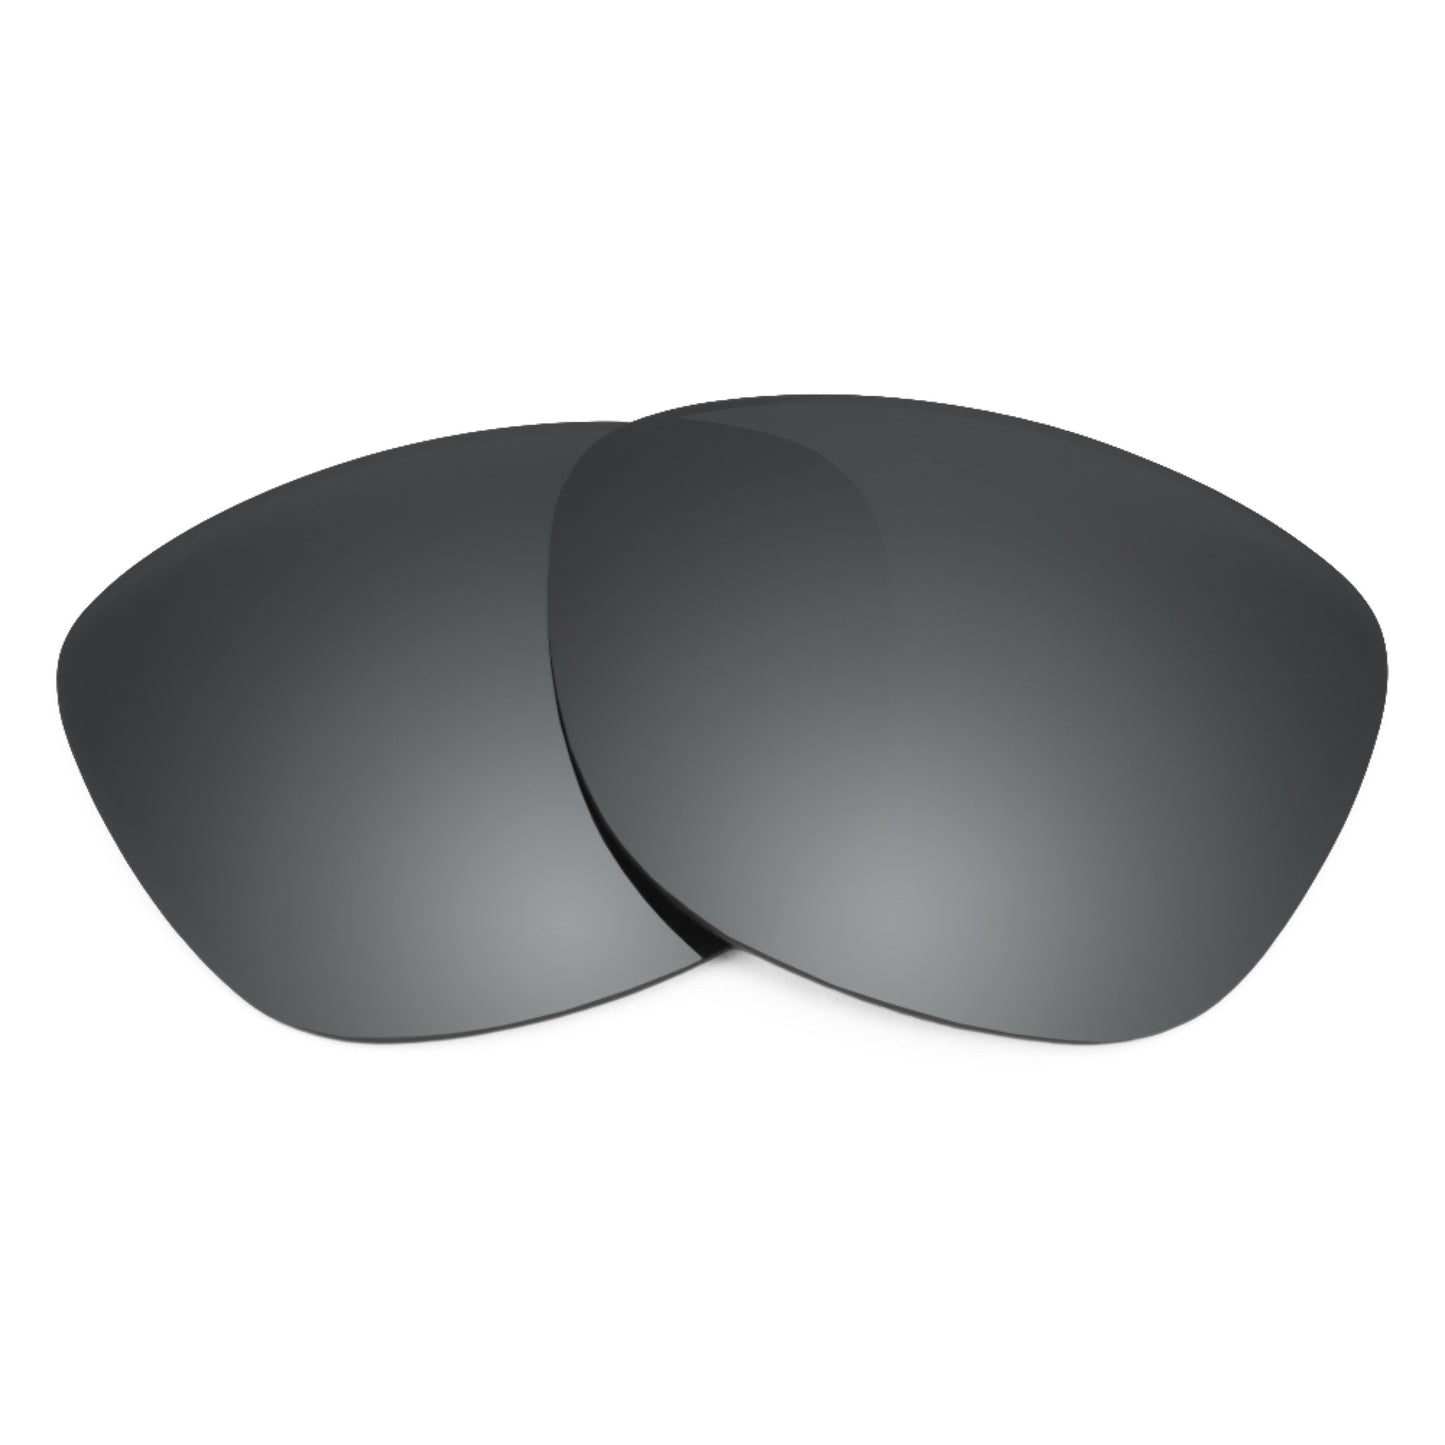 Revant replacement lenses for Ray-Ban Justin Classic RB4165 55mm Elite Polarized Black Chrome